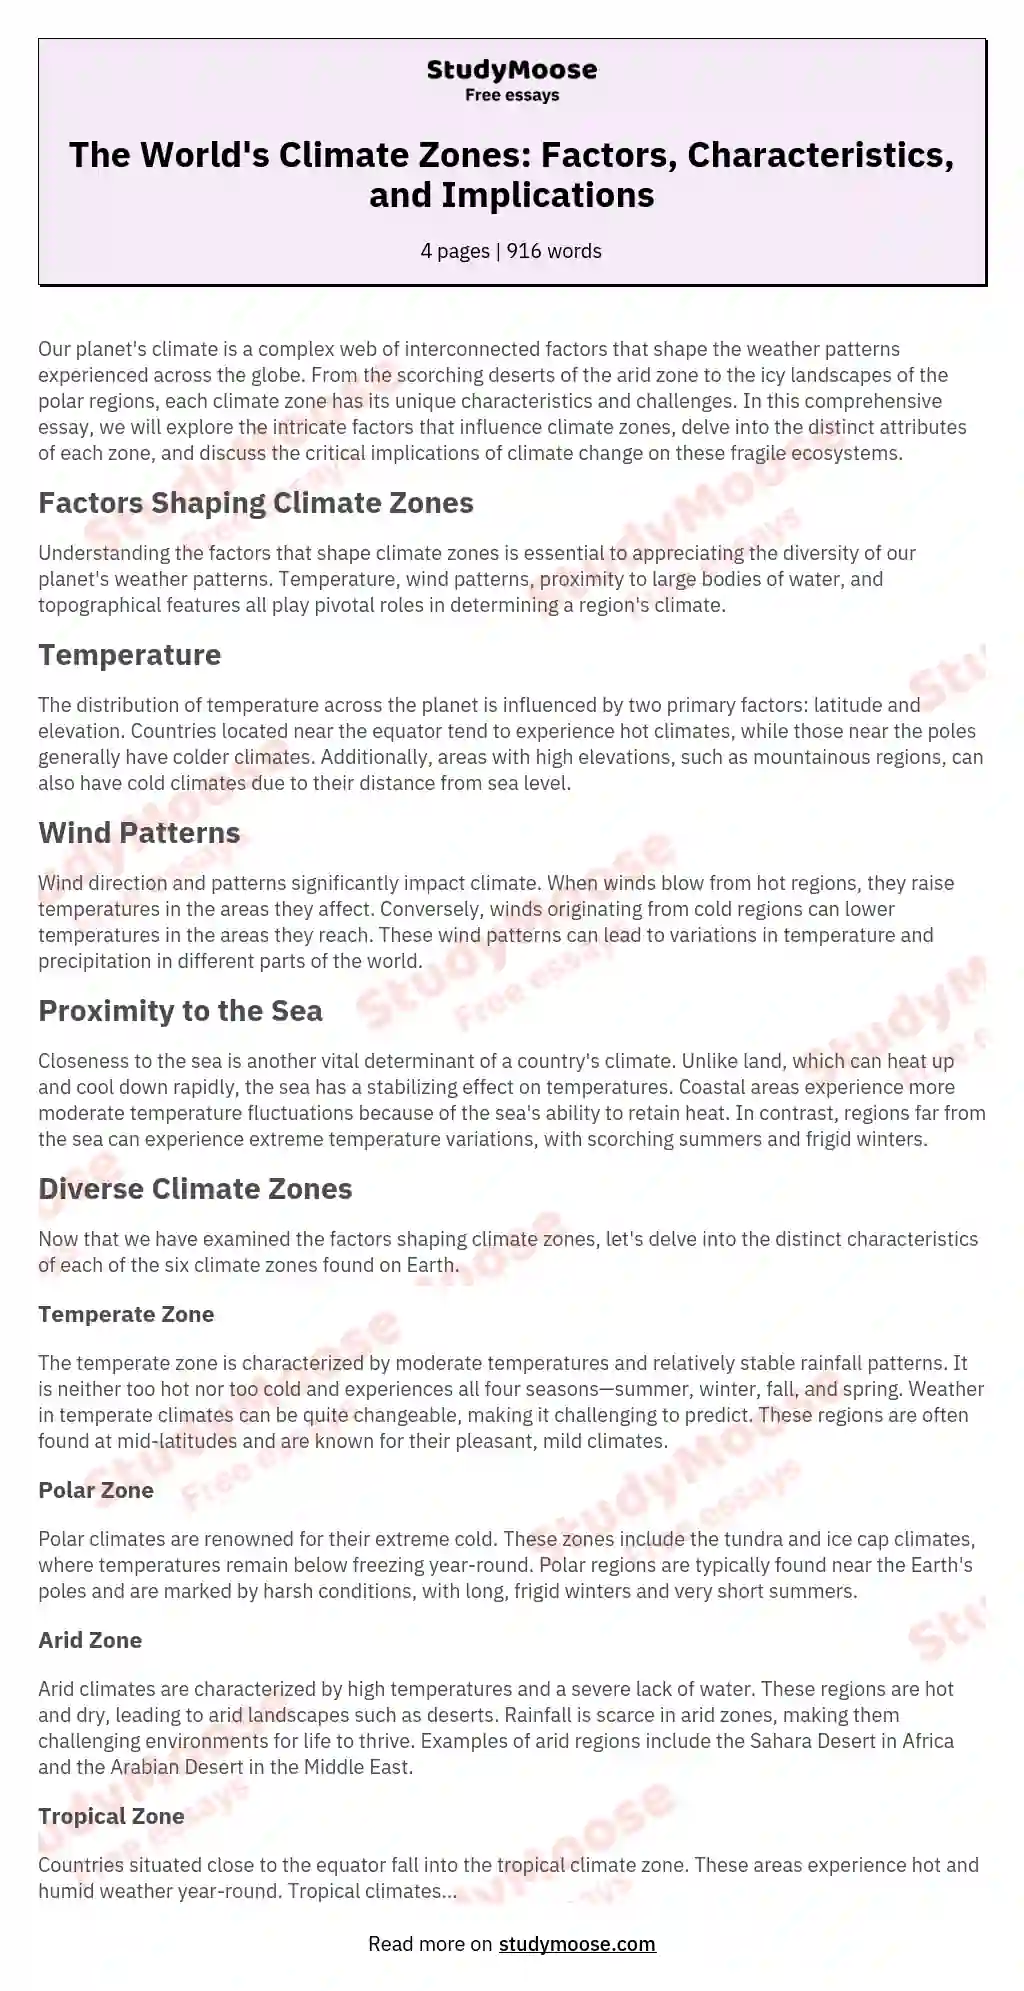 The World's Climate Zones: Factors, Characteristics, and Implications essay